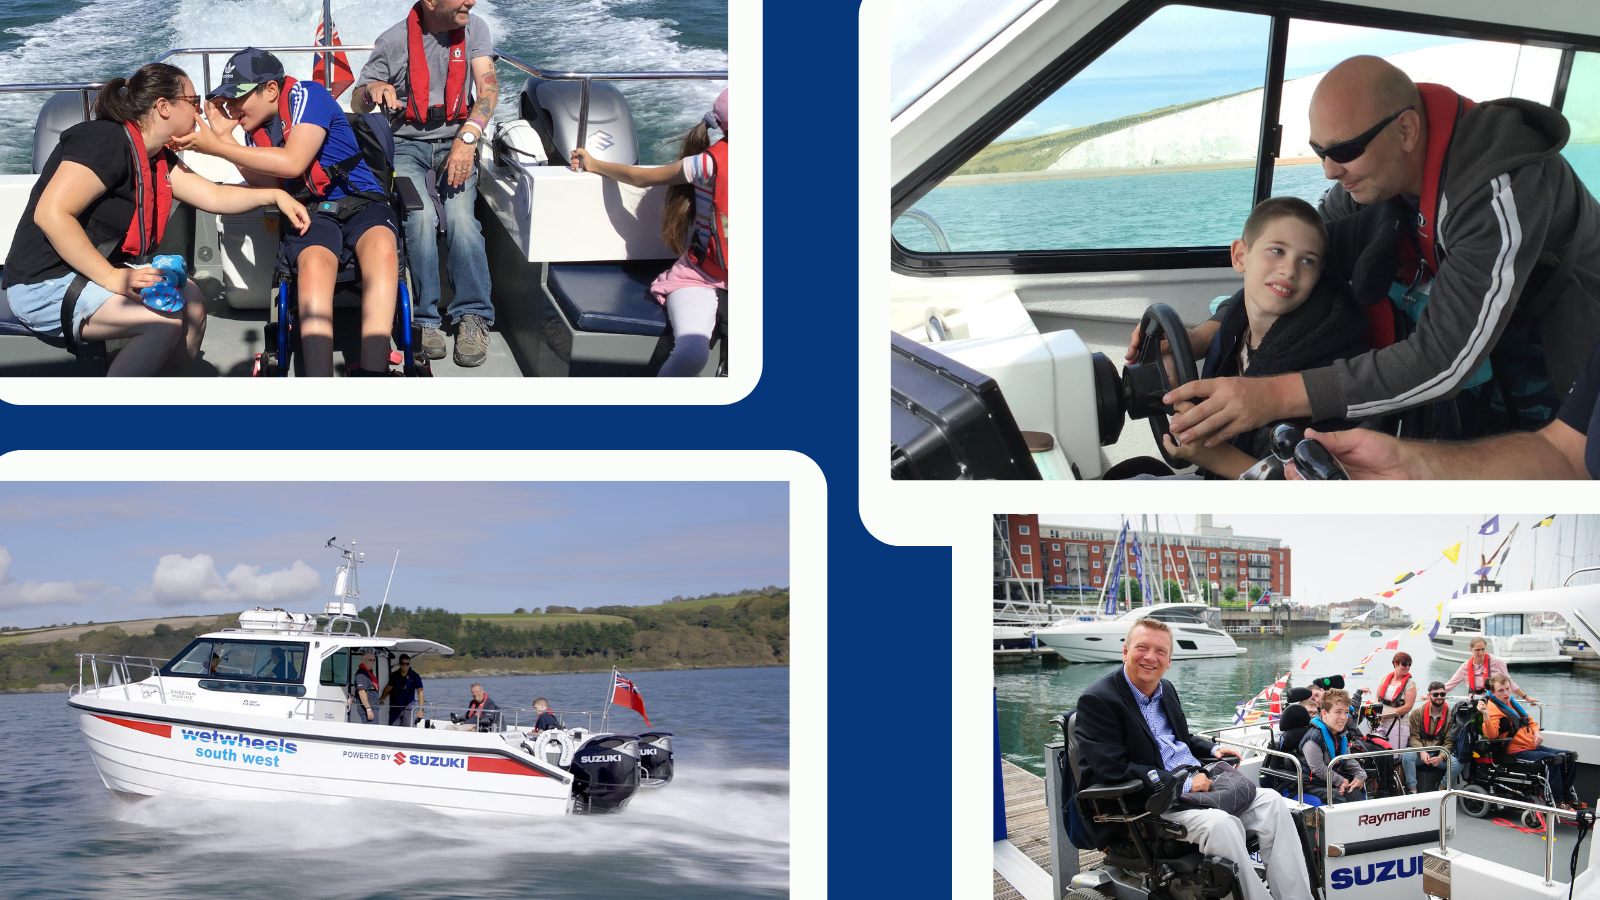 Four images from Wetwheels. The top left image is of a boy, who is a wheelchair user, enjoying a day on the boat with his family. The bottom right image is of one of the wetwheels' boats in the water. The top right image is of a young boy steering the boat with the help of a man. The bottom right image is of Geoff Holt in his powerchair, smiling next to a group of people who are using on the boats.